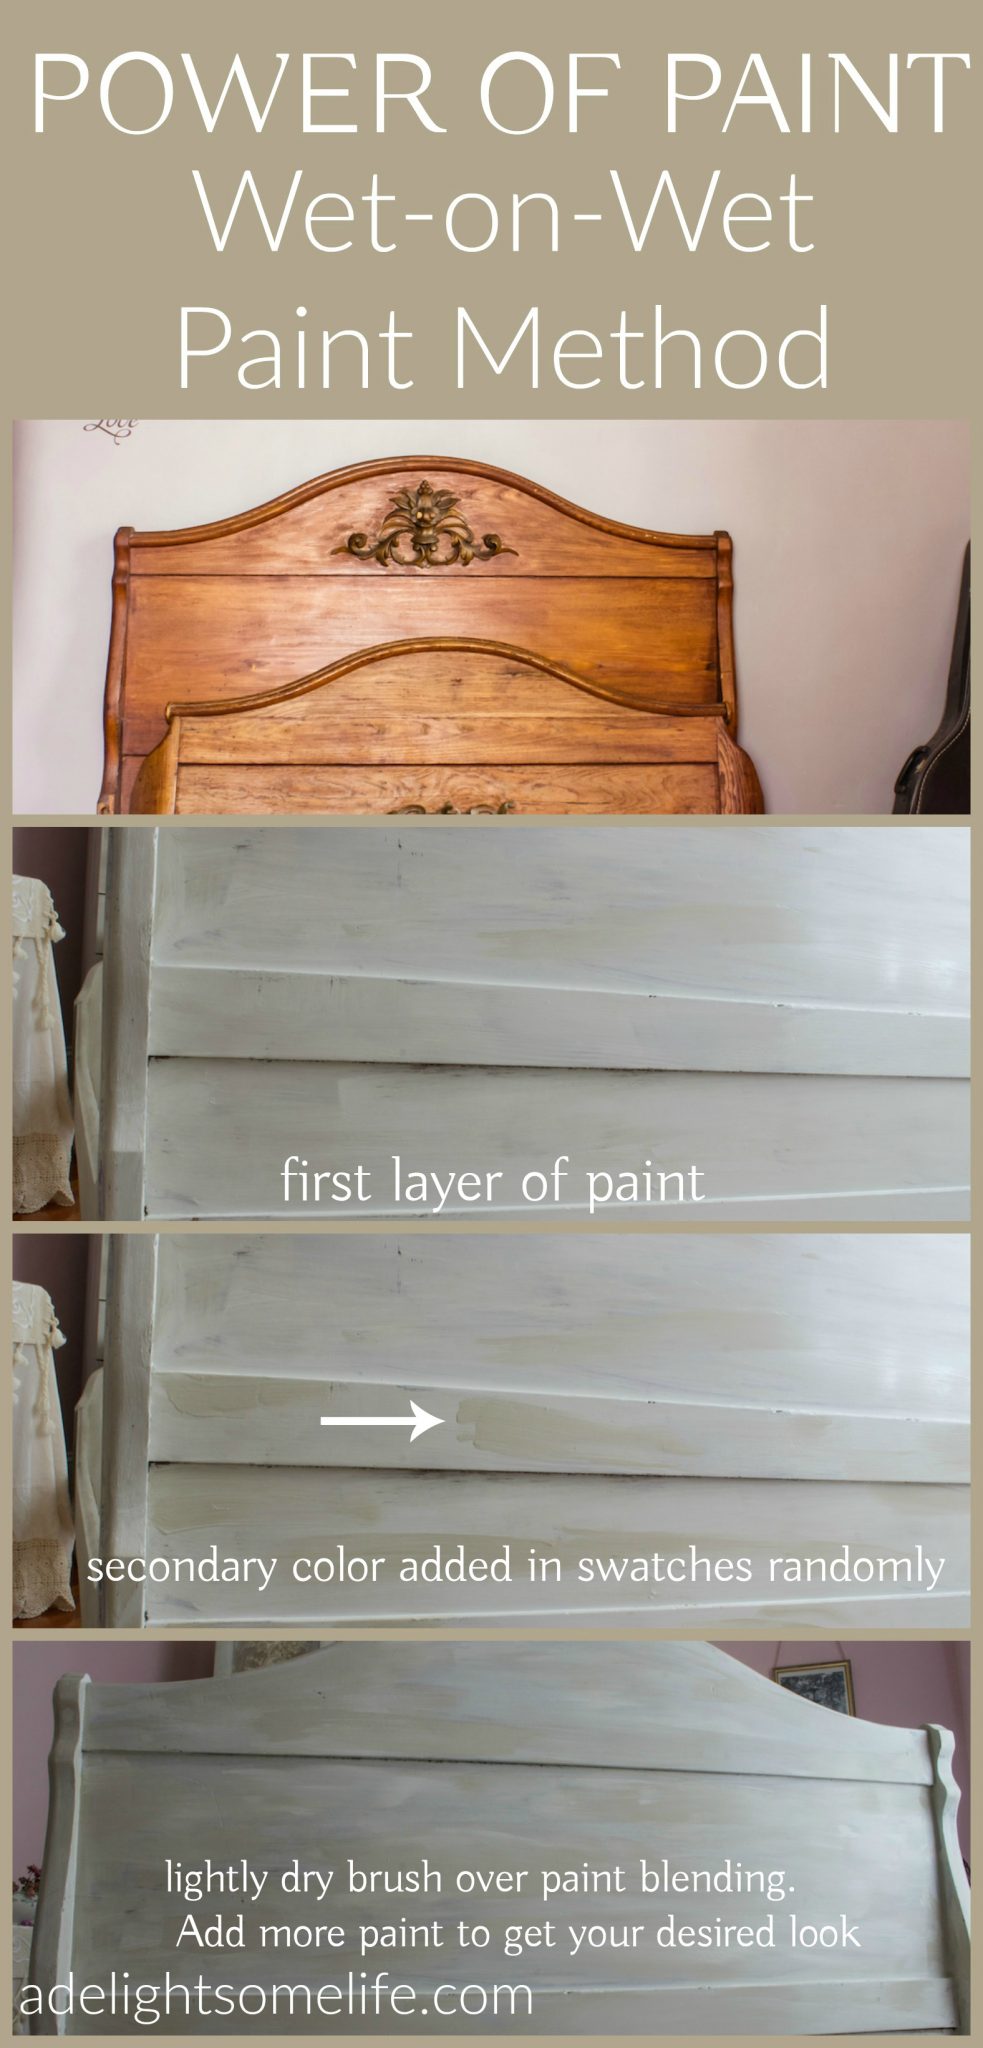 Painted Furniture I Love The Awesome Power Of Paint